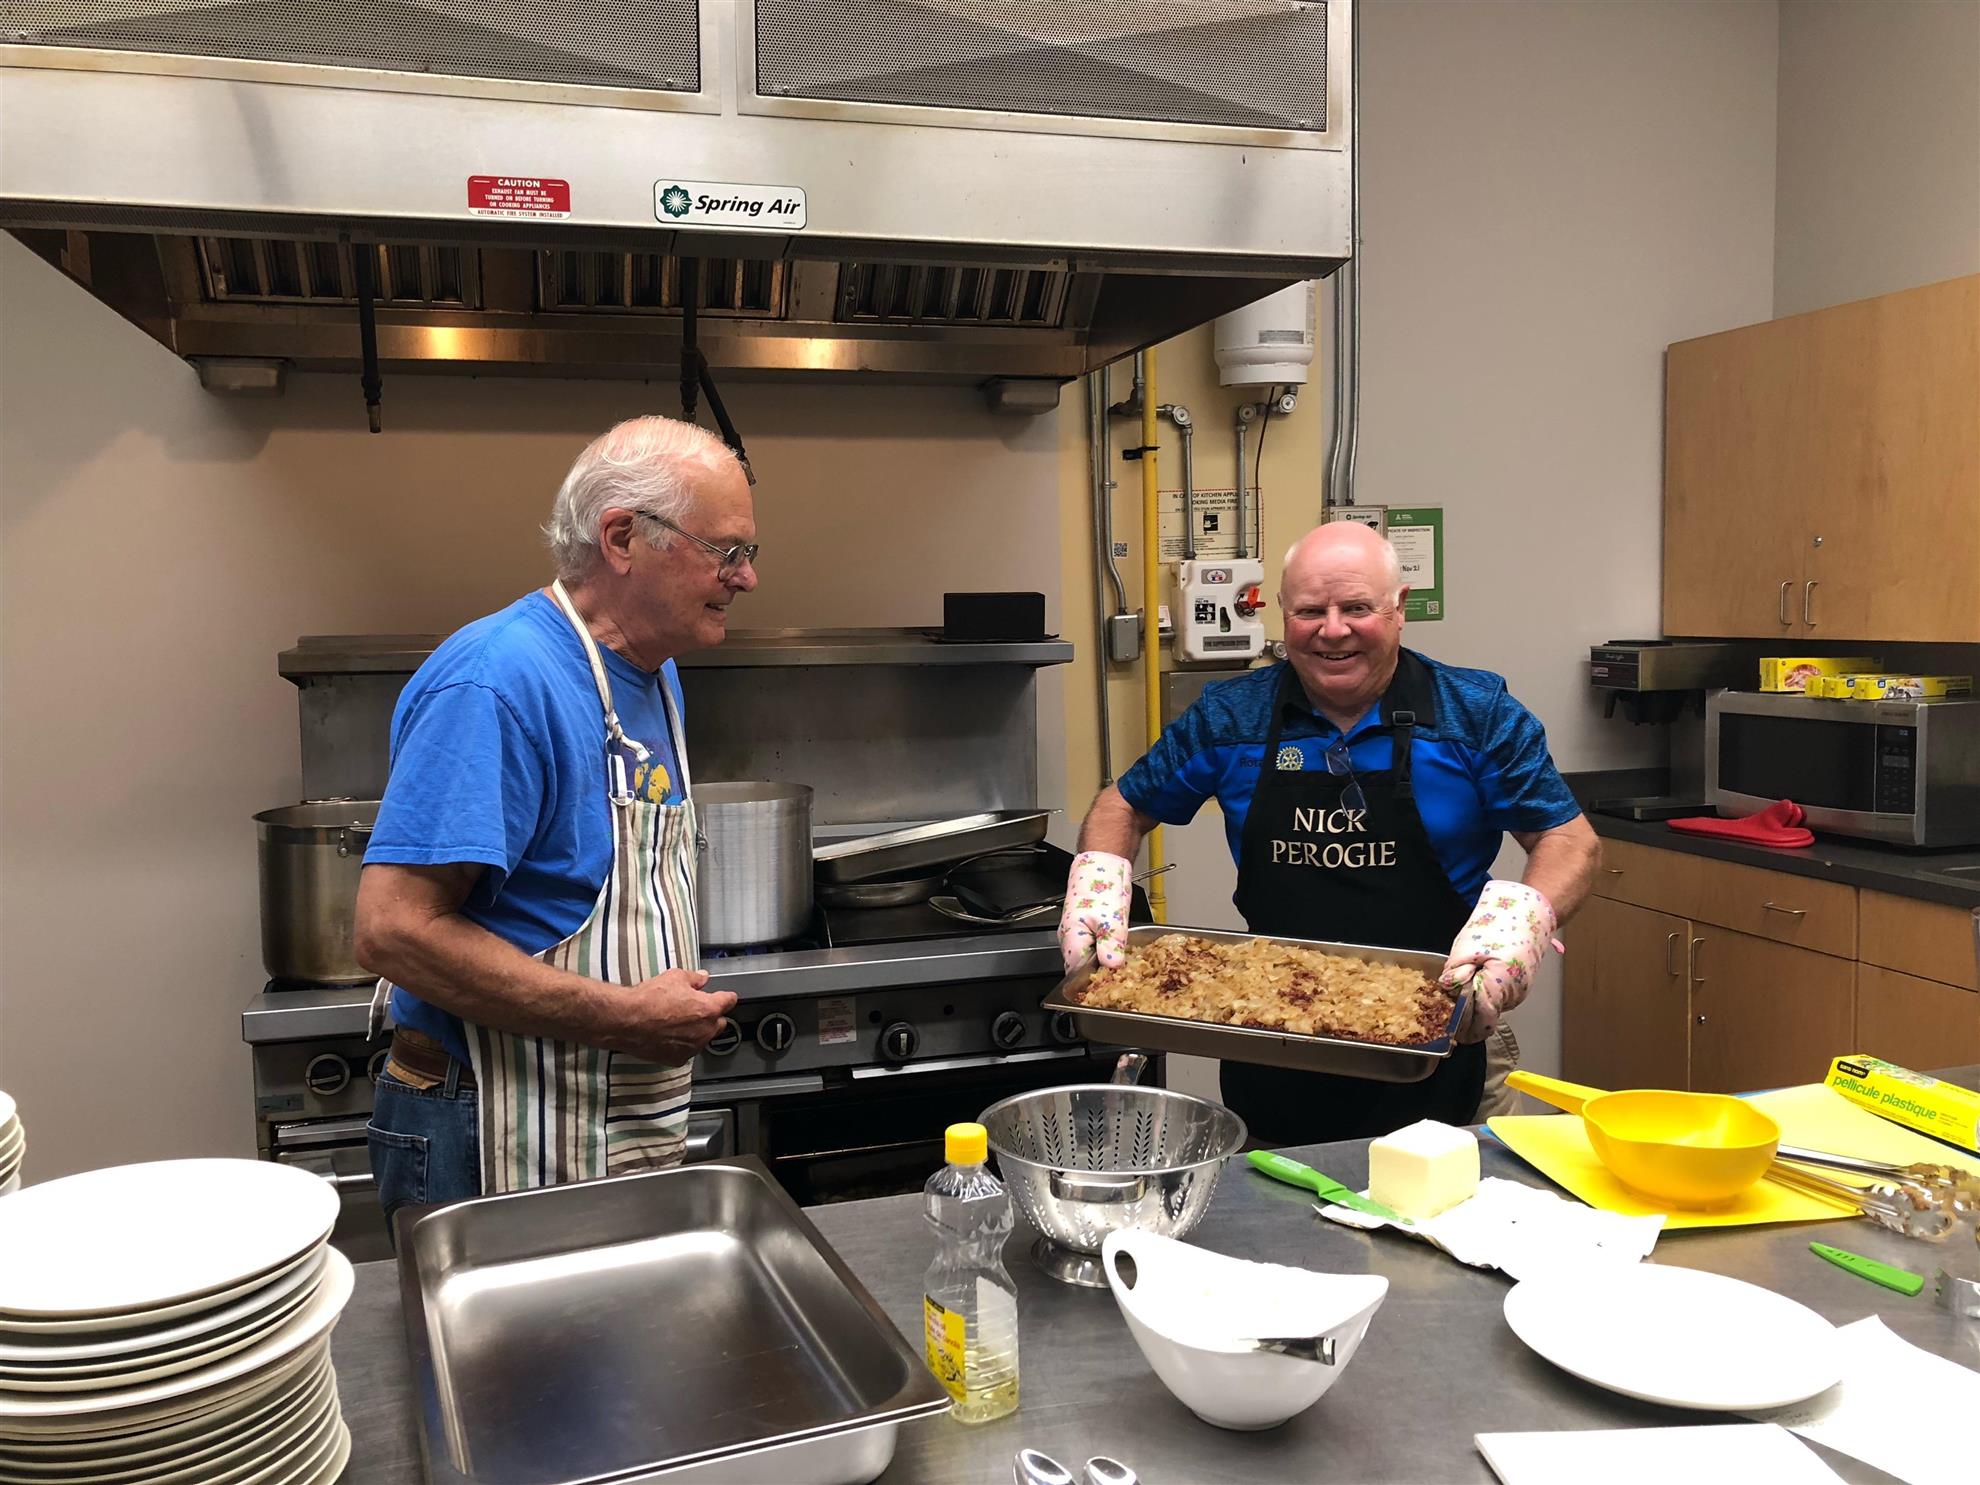 2 smiling men wearing aprons in a commercial kitchen. 1 man is holding a large tray of apple crisp.